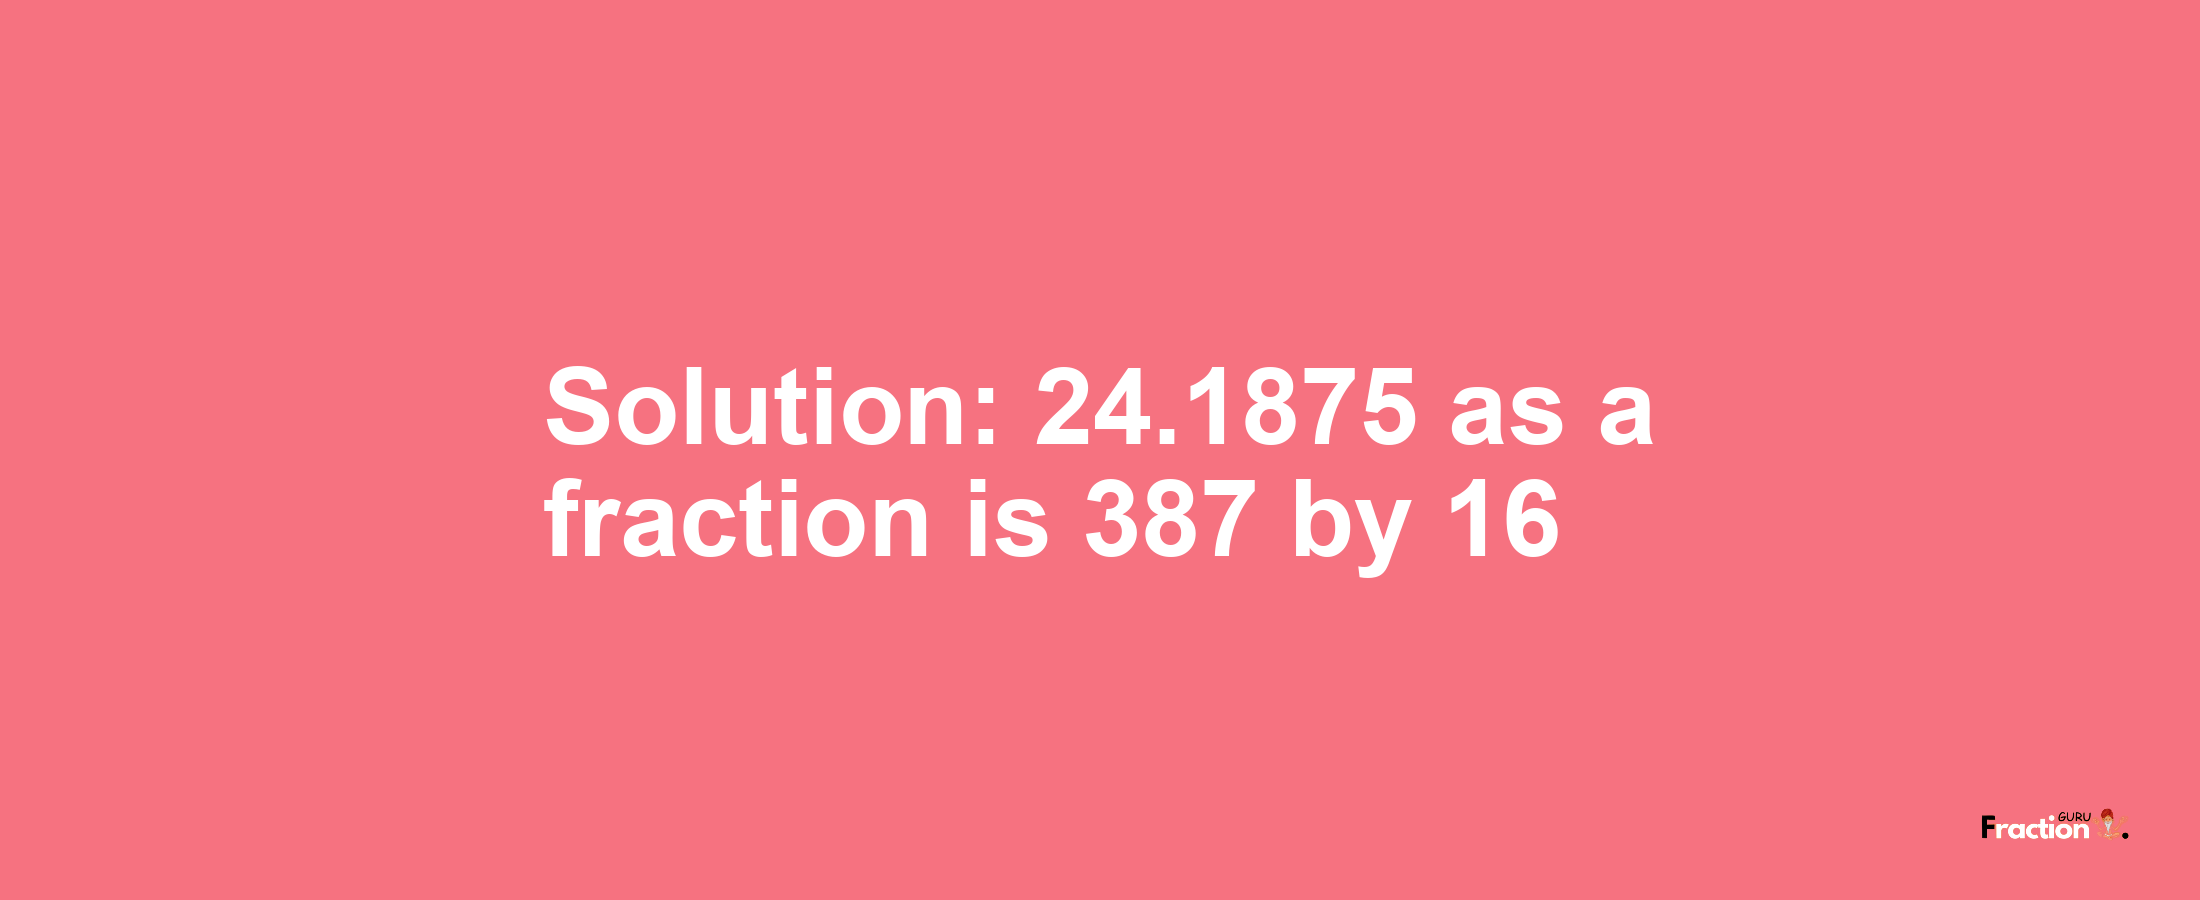 Solution:24.1875 as a fraction is 387/16